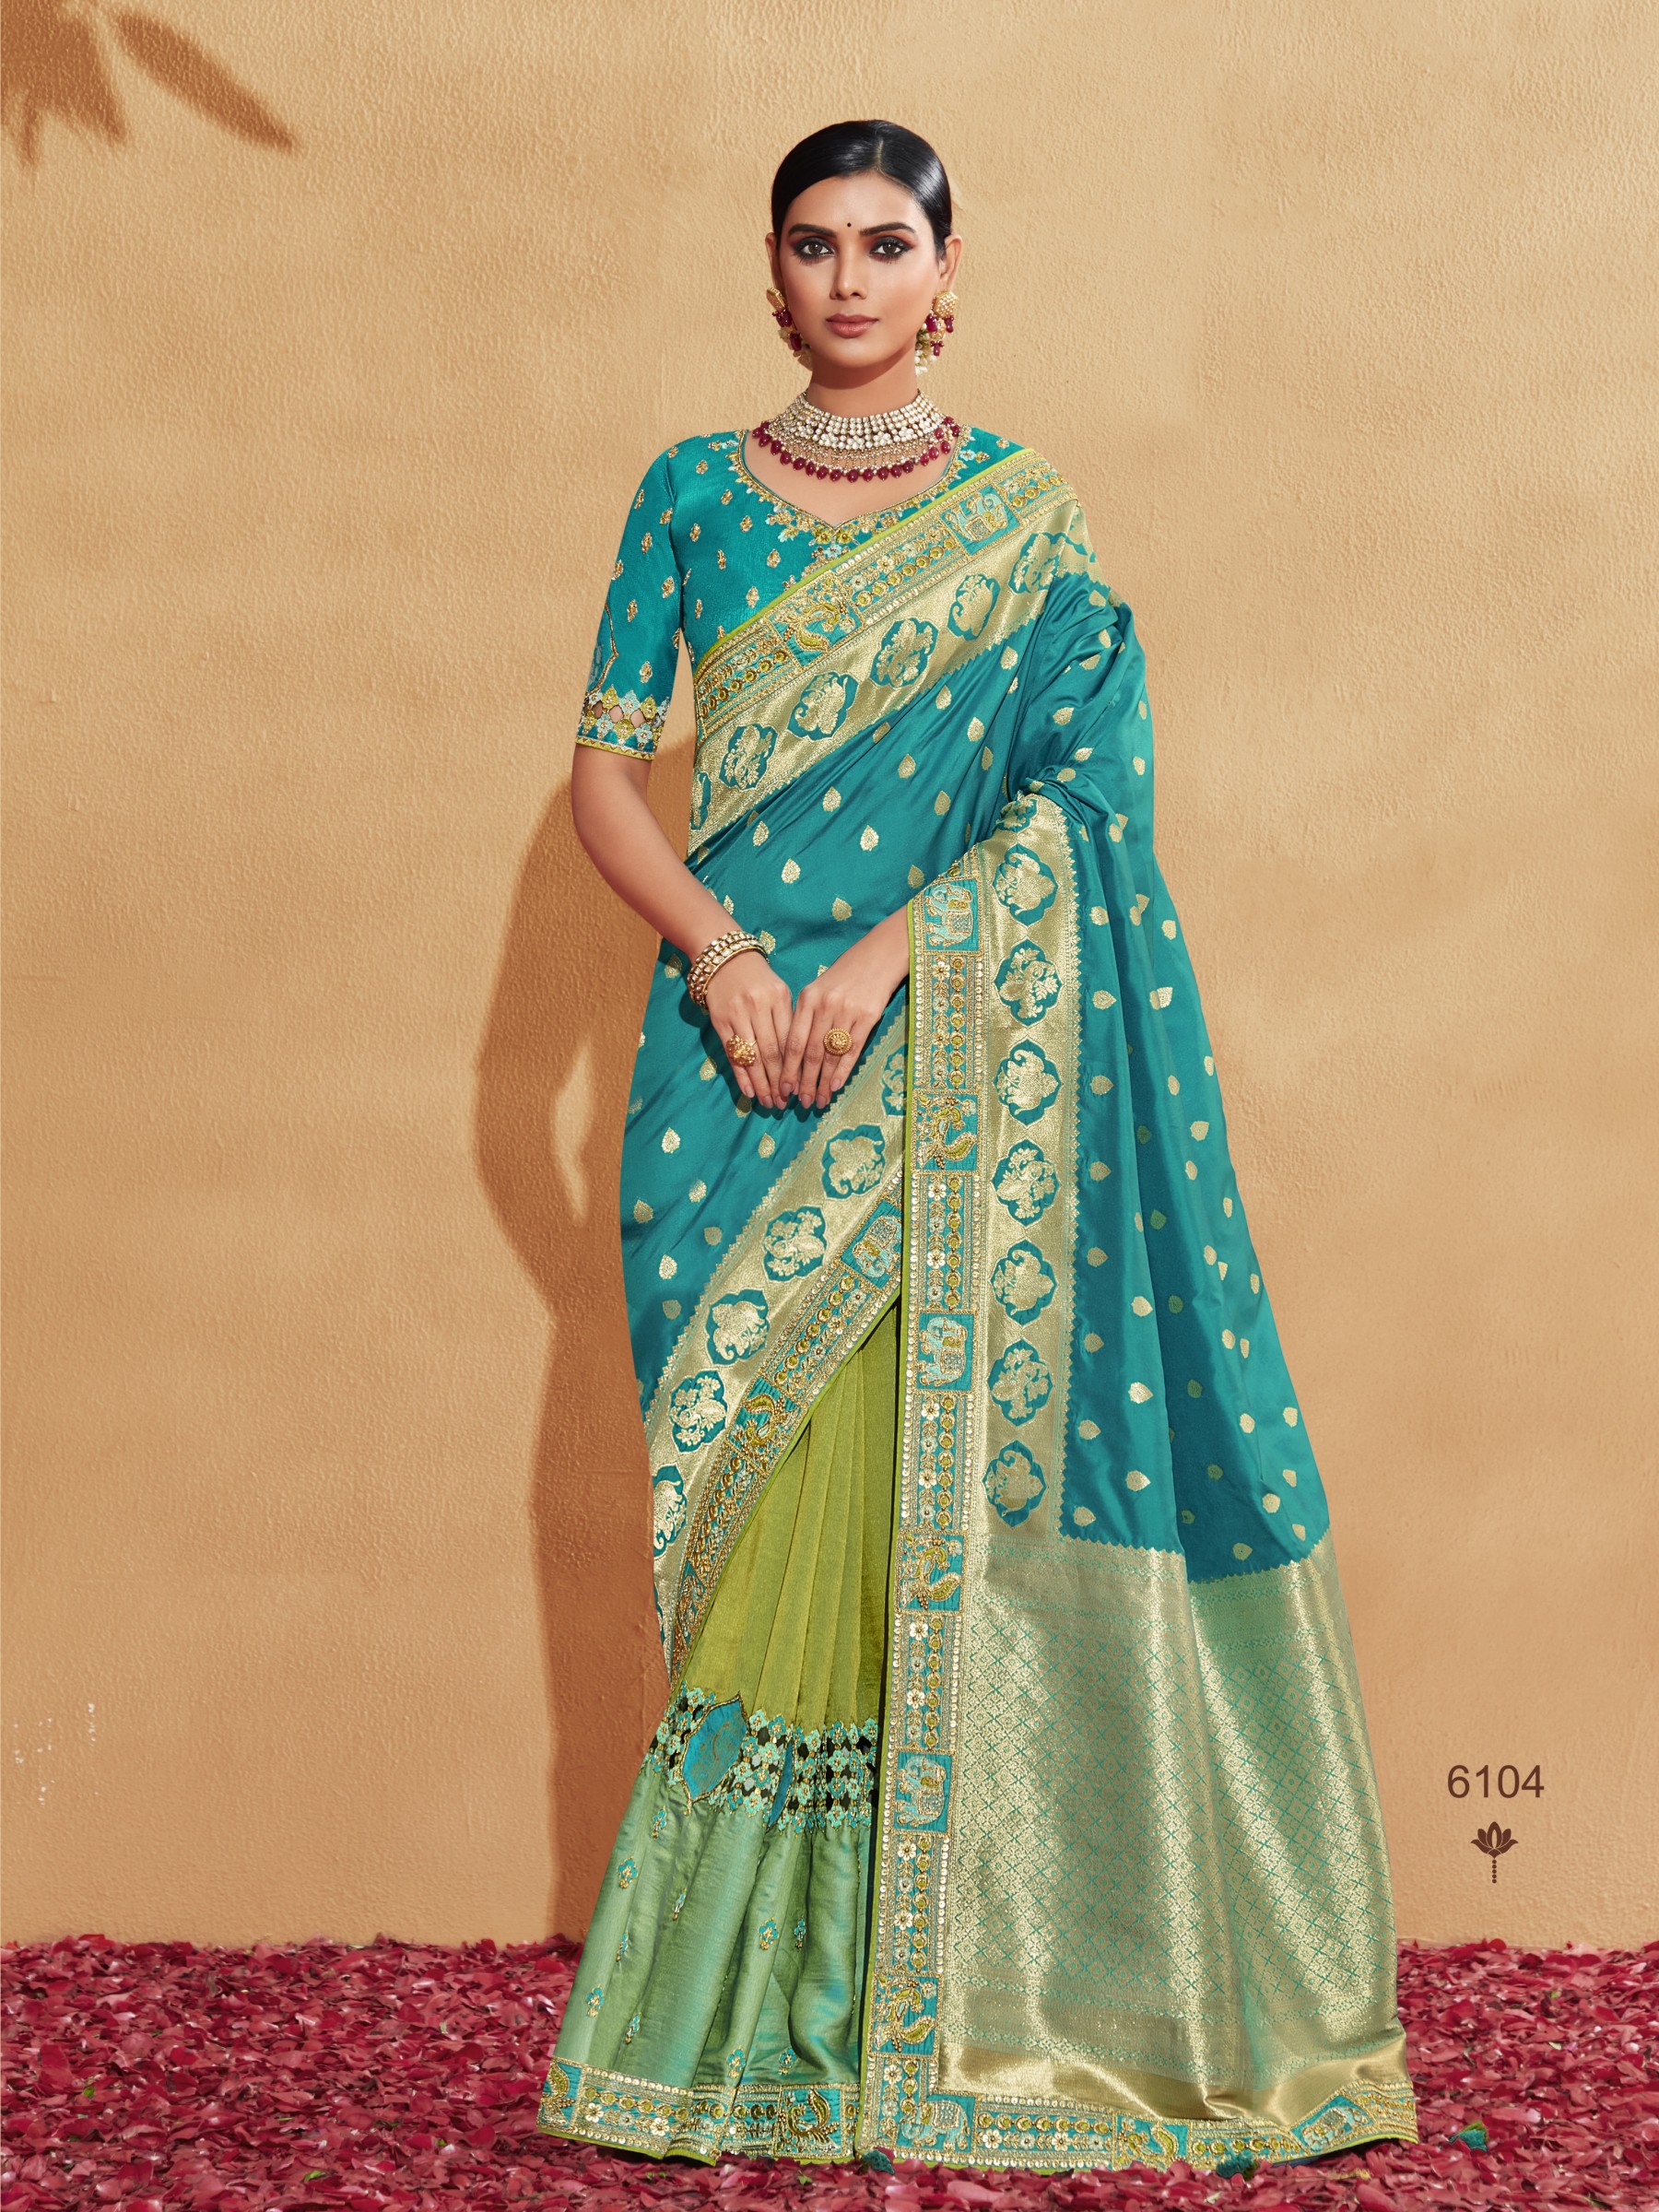  Banarsi silk  Saree Blue & Green Color With Embroidery Work